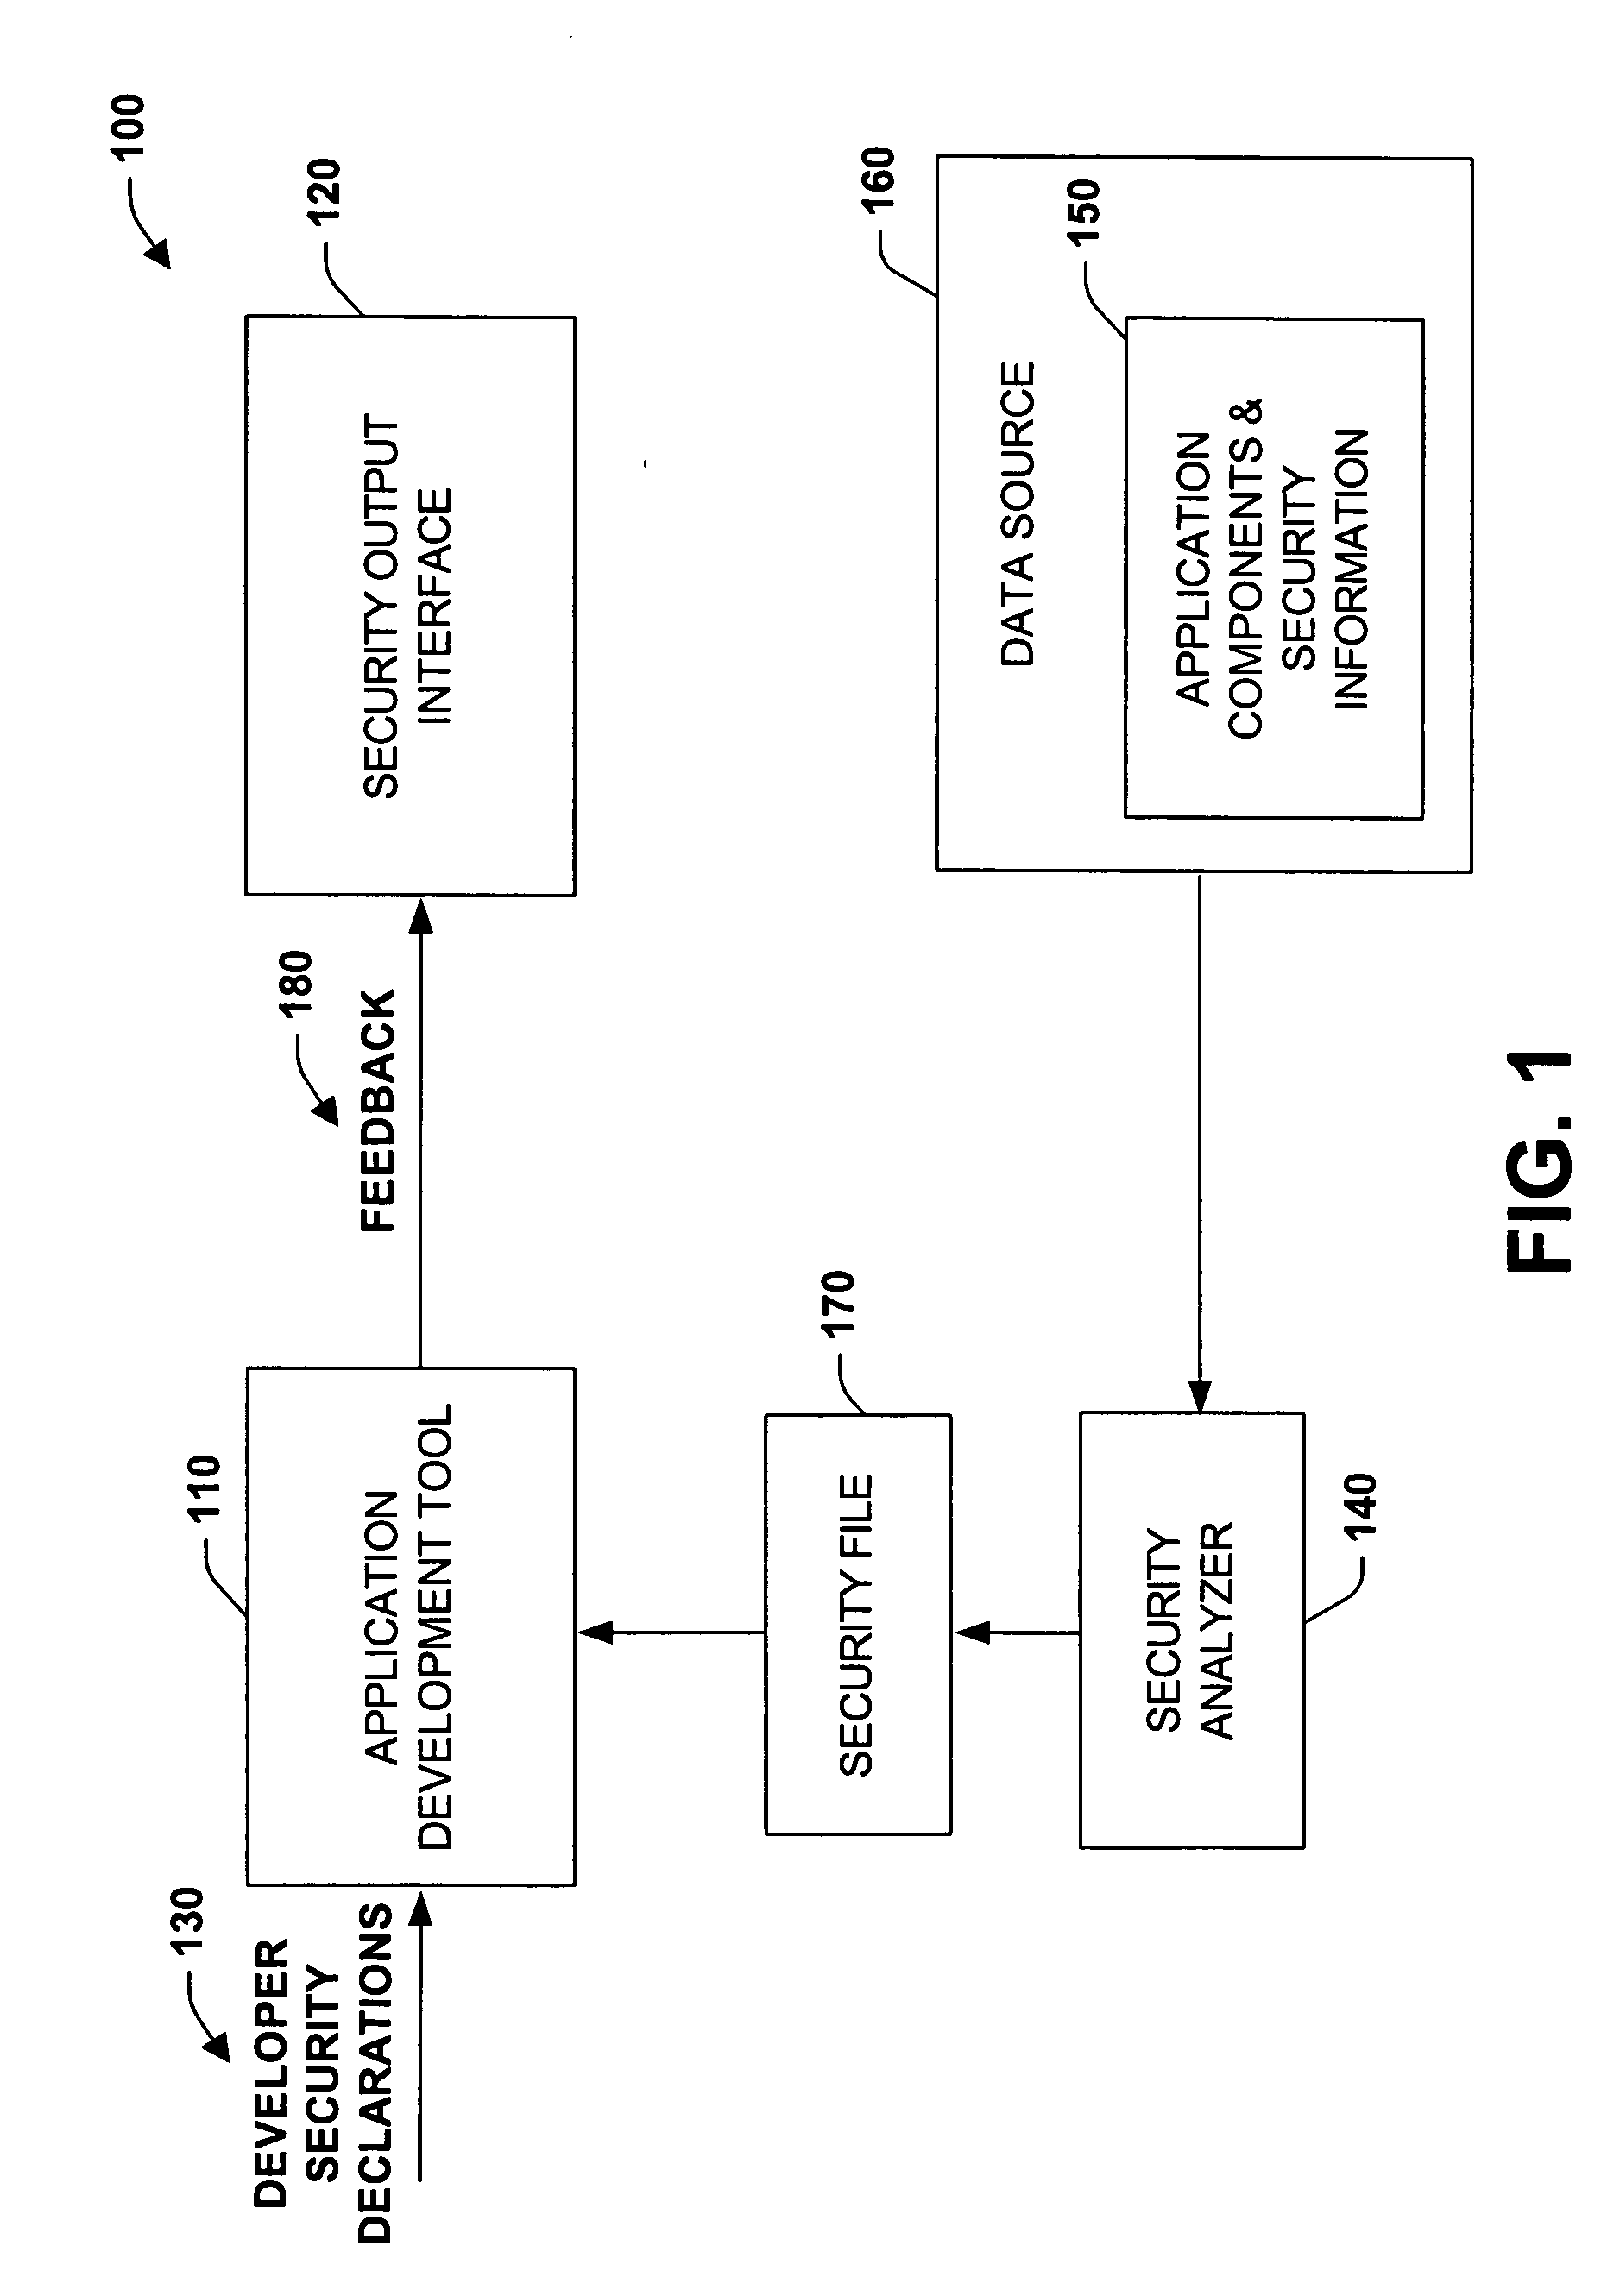 System and methods for processing partial trust applications